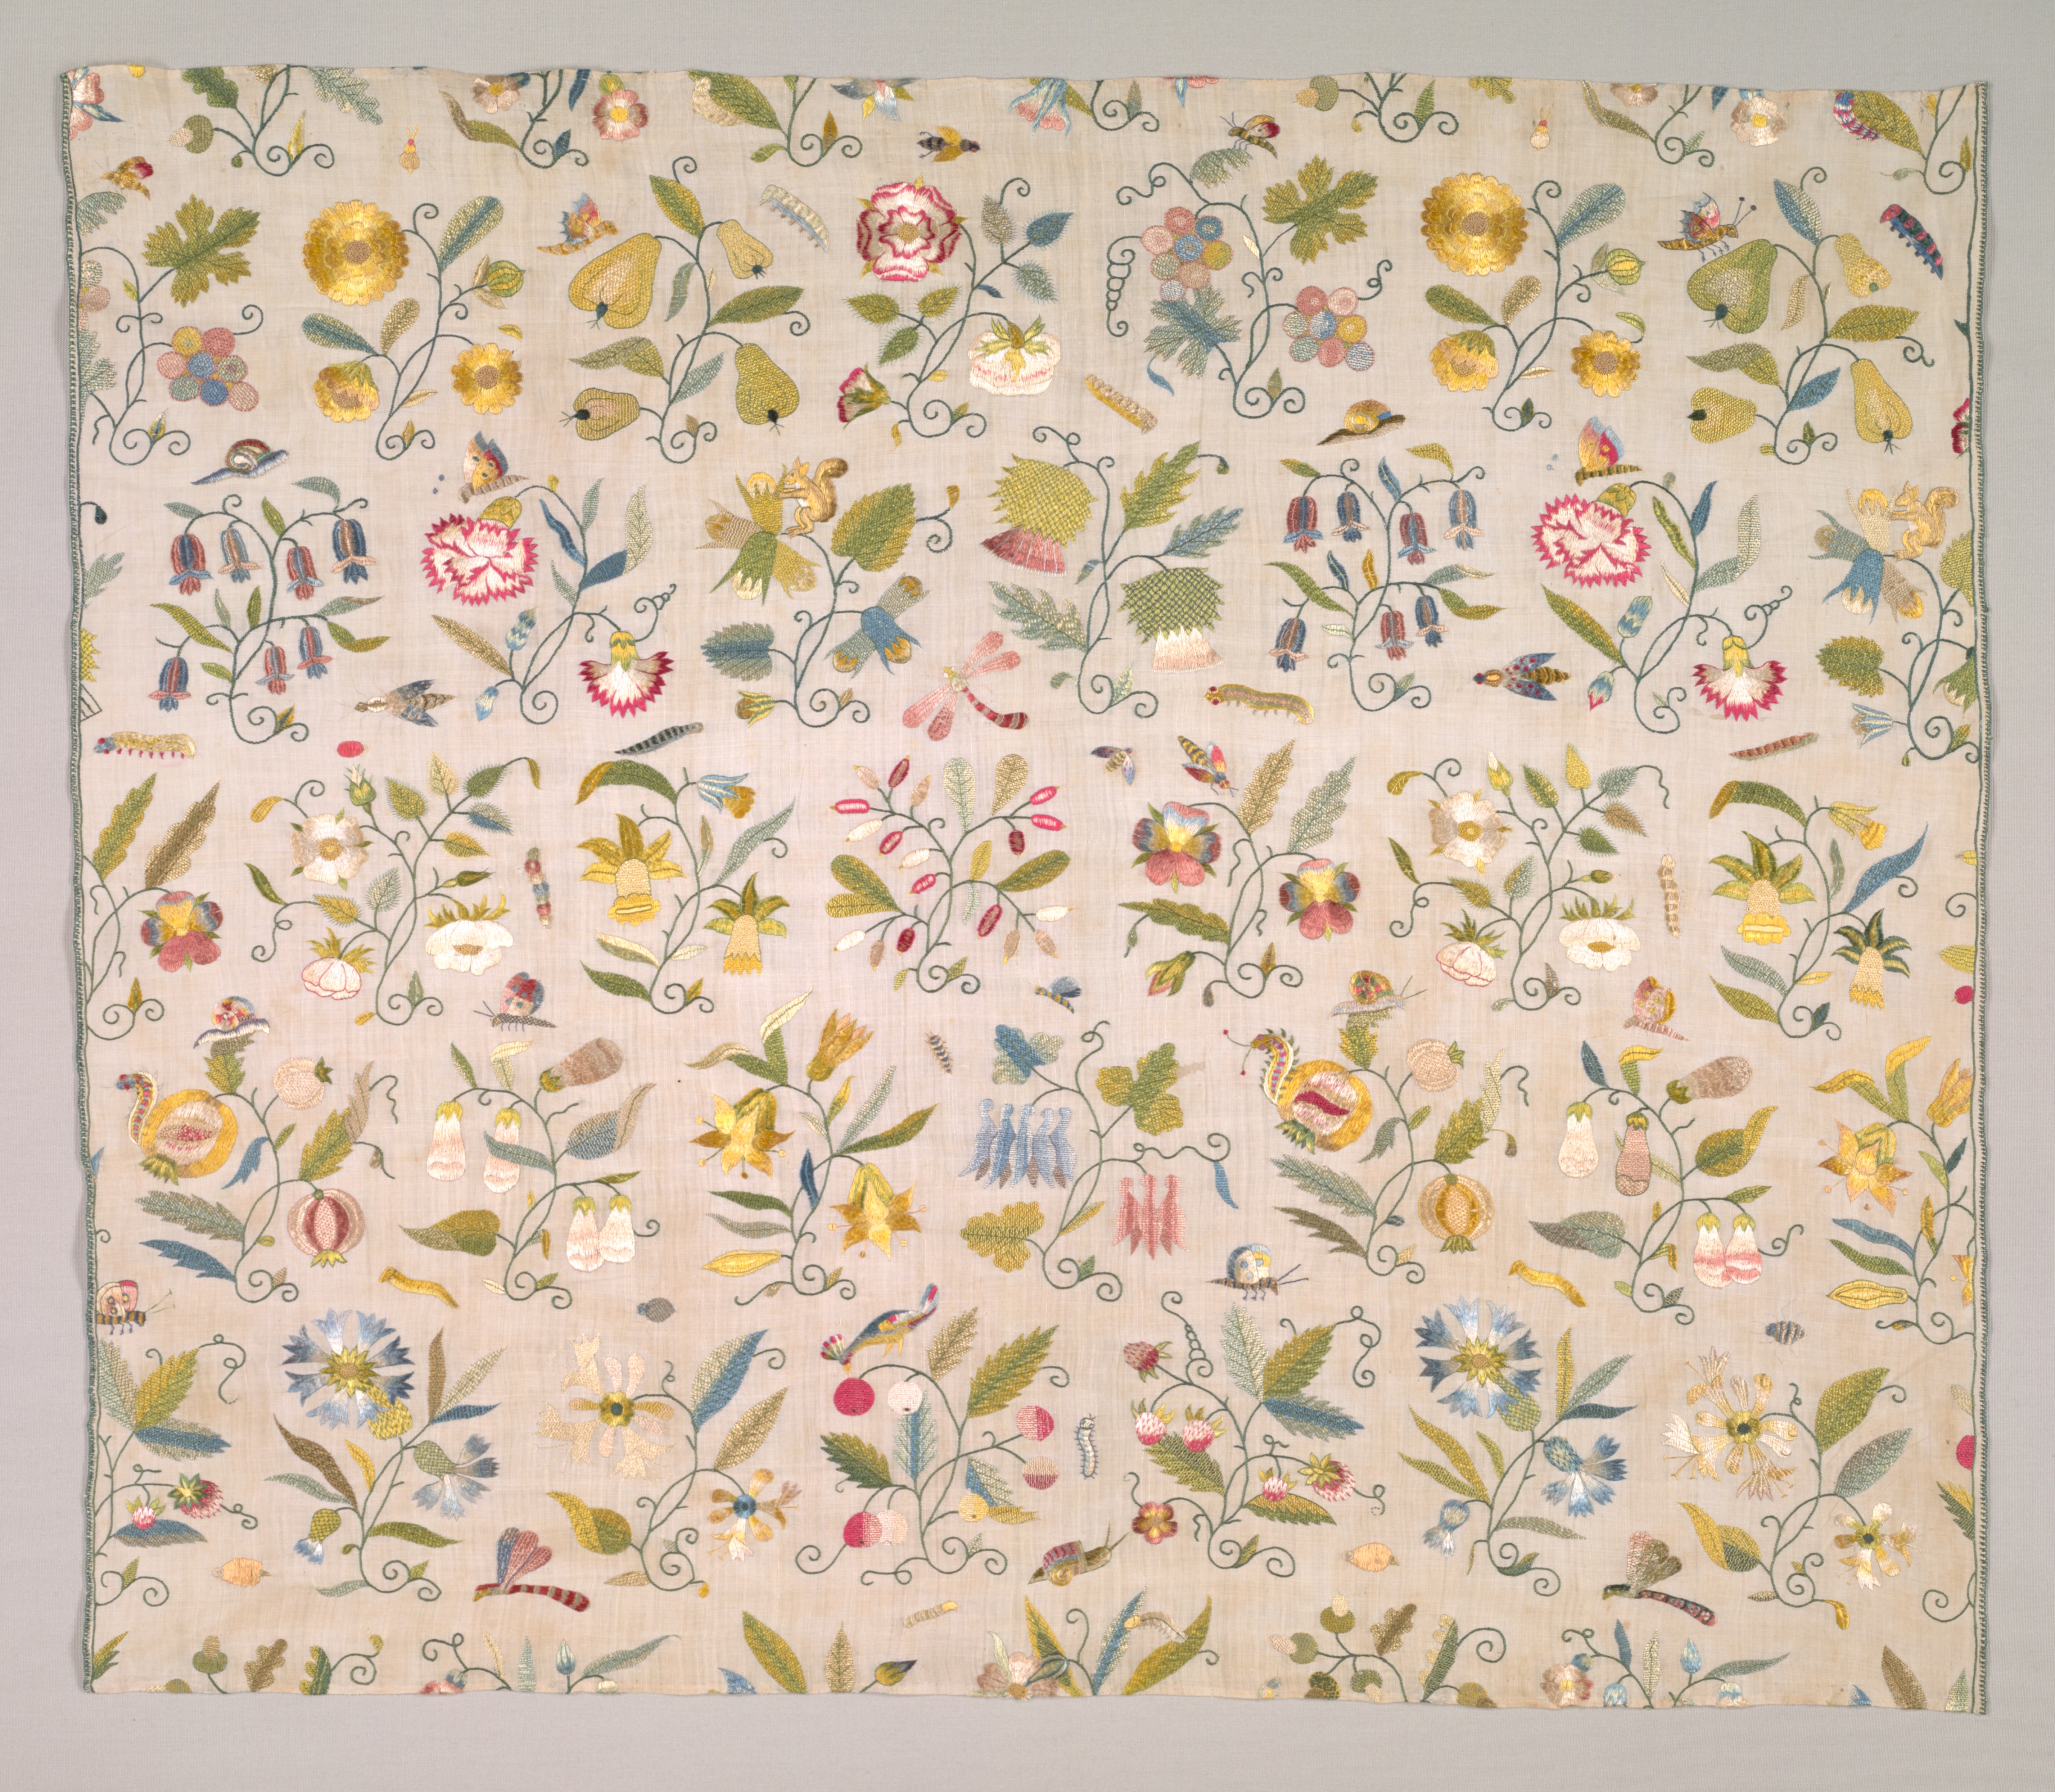 Floral Panel, Probably from a Curtain